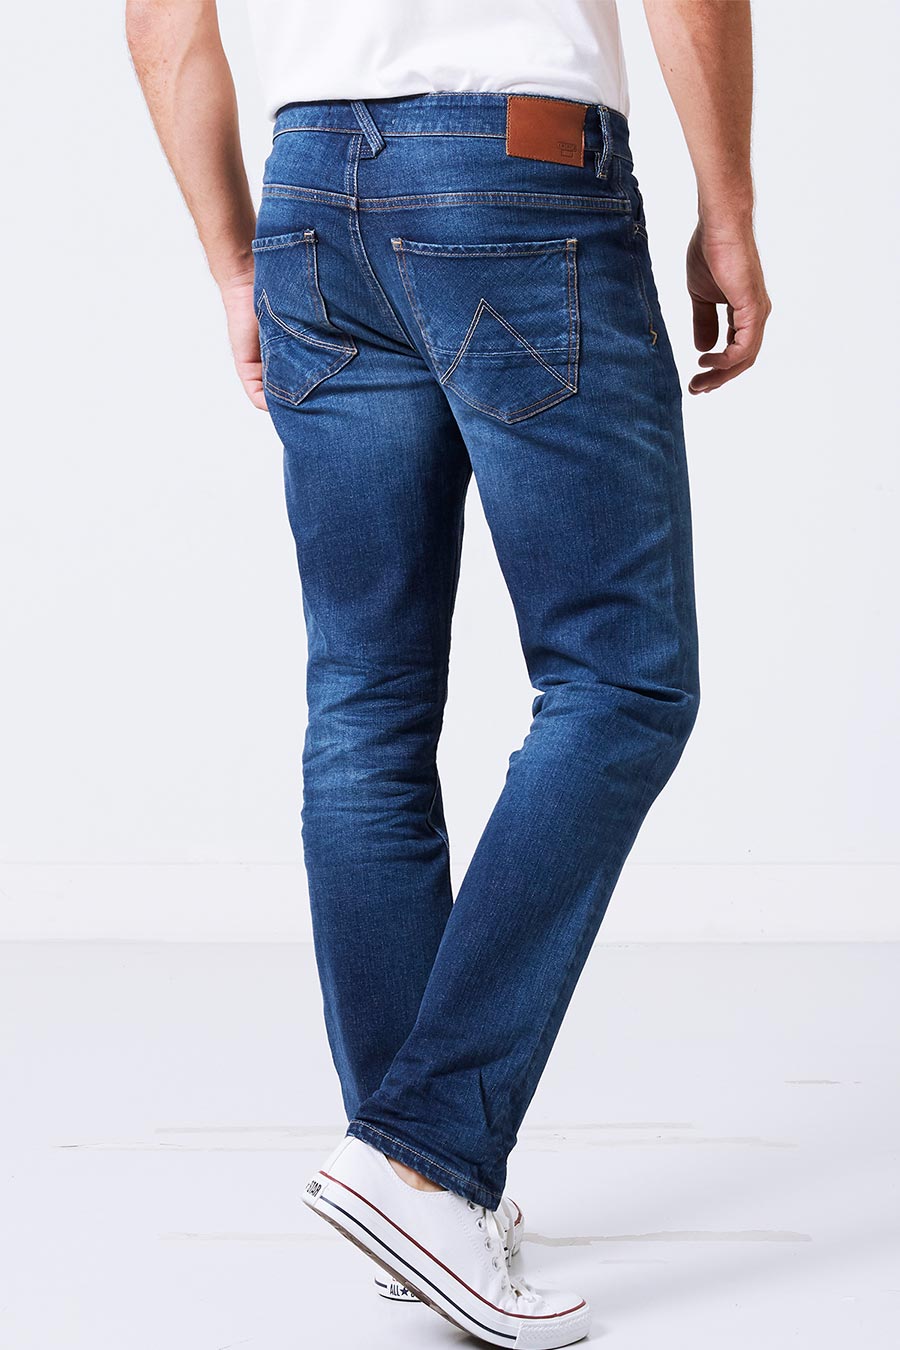 Hommes jeans fit guide | America Today